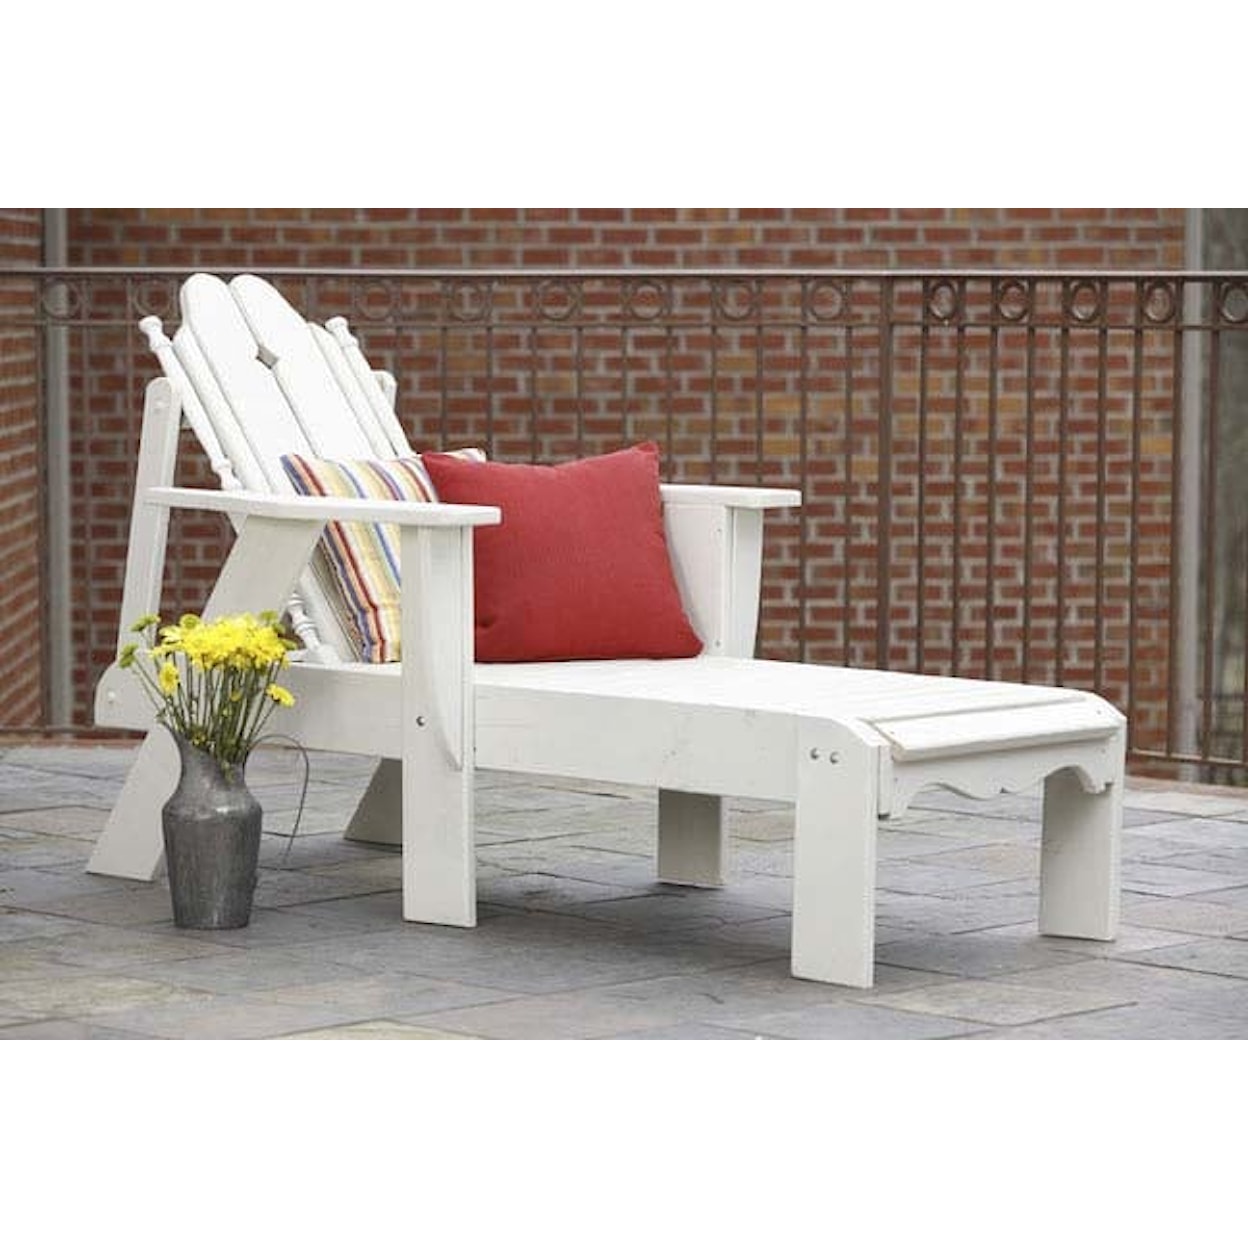 Uwharrie Chair The Nantucket Collection NANTUCKET CHAISE LOUNGE